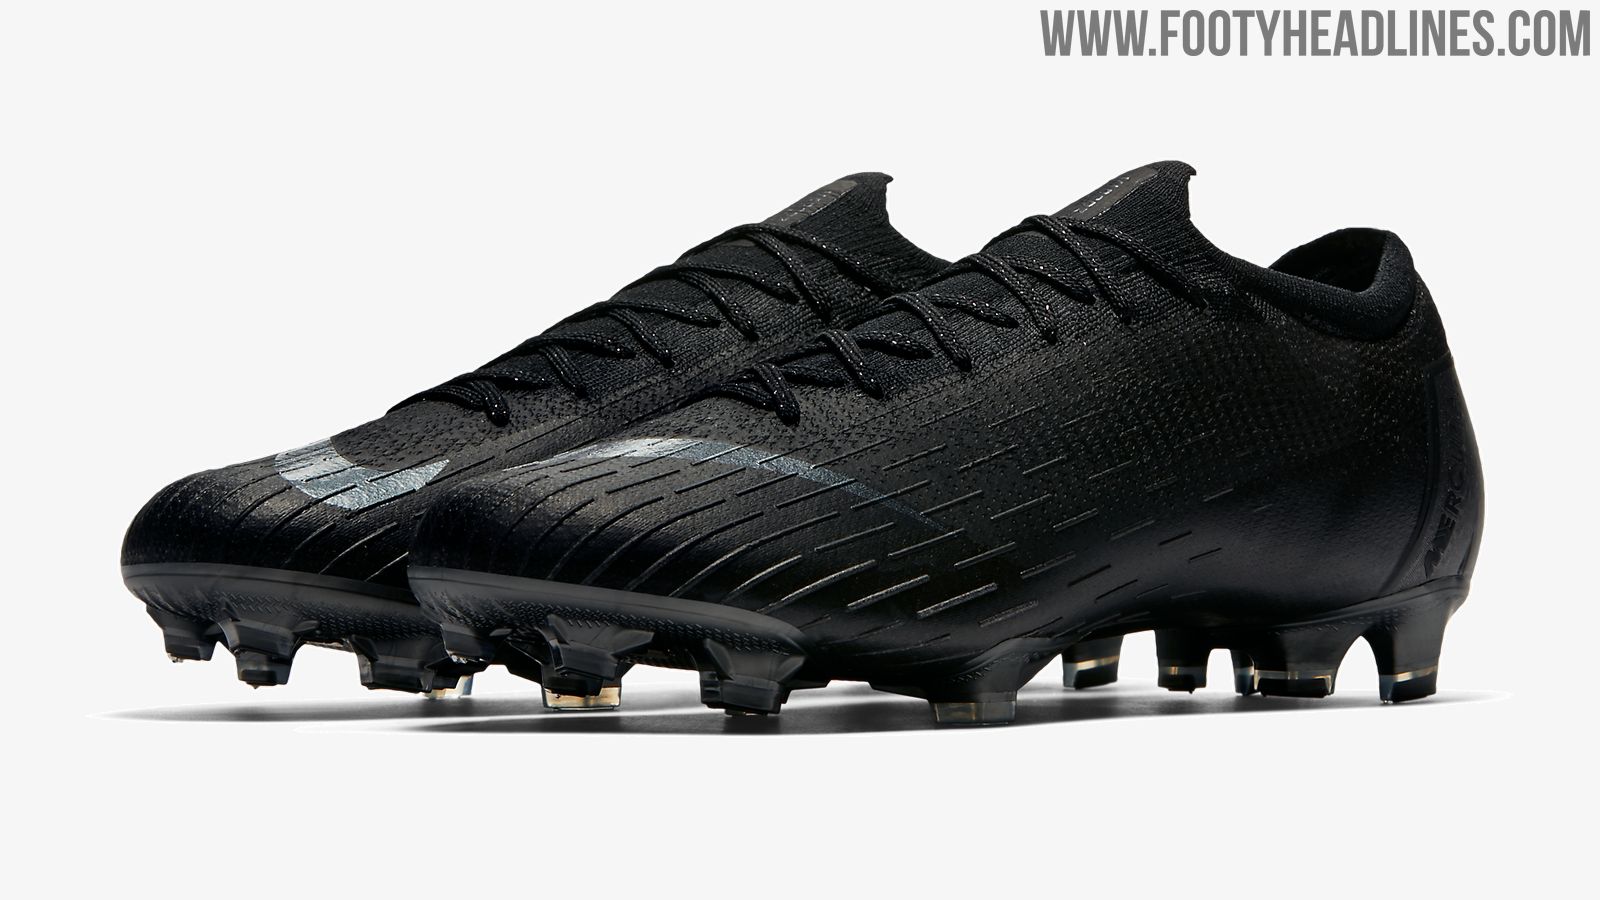 Blackout Nike Mercurial Vapor 360 Stealth Ops Boots Released - Footy ...